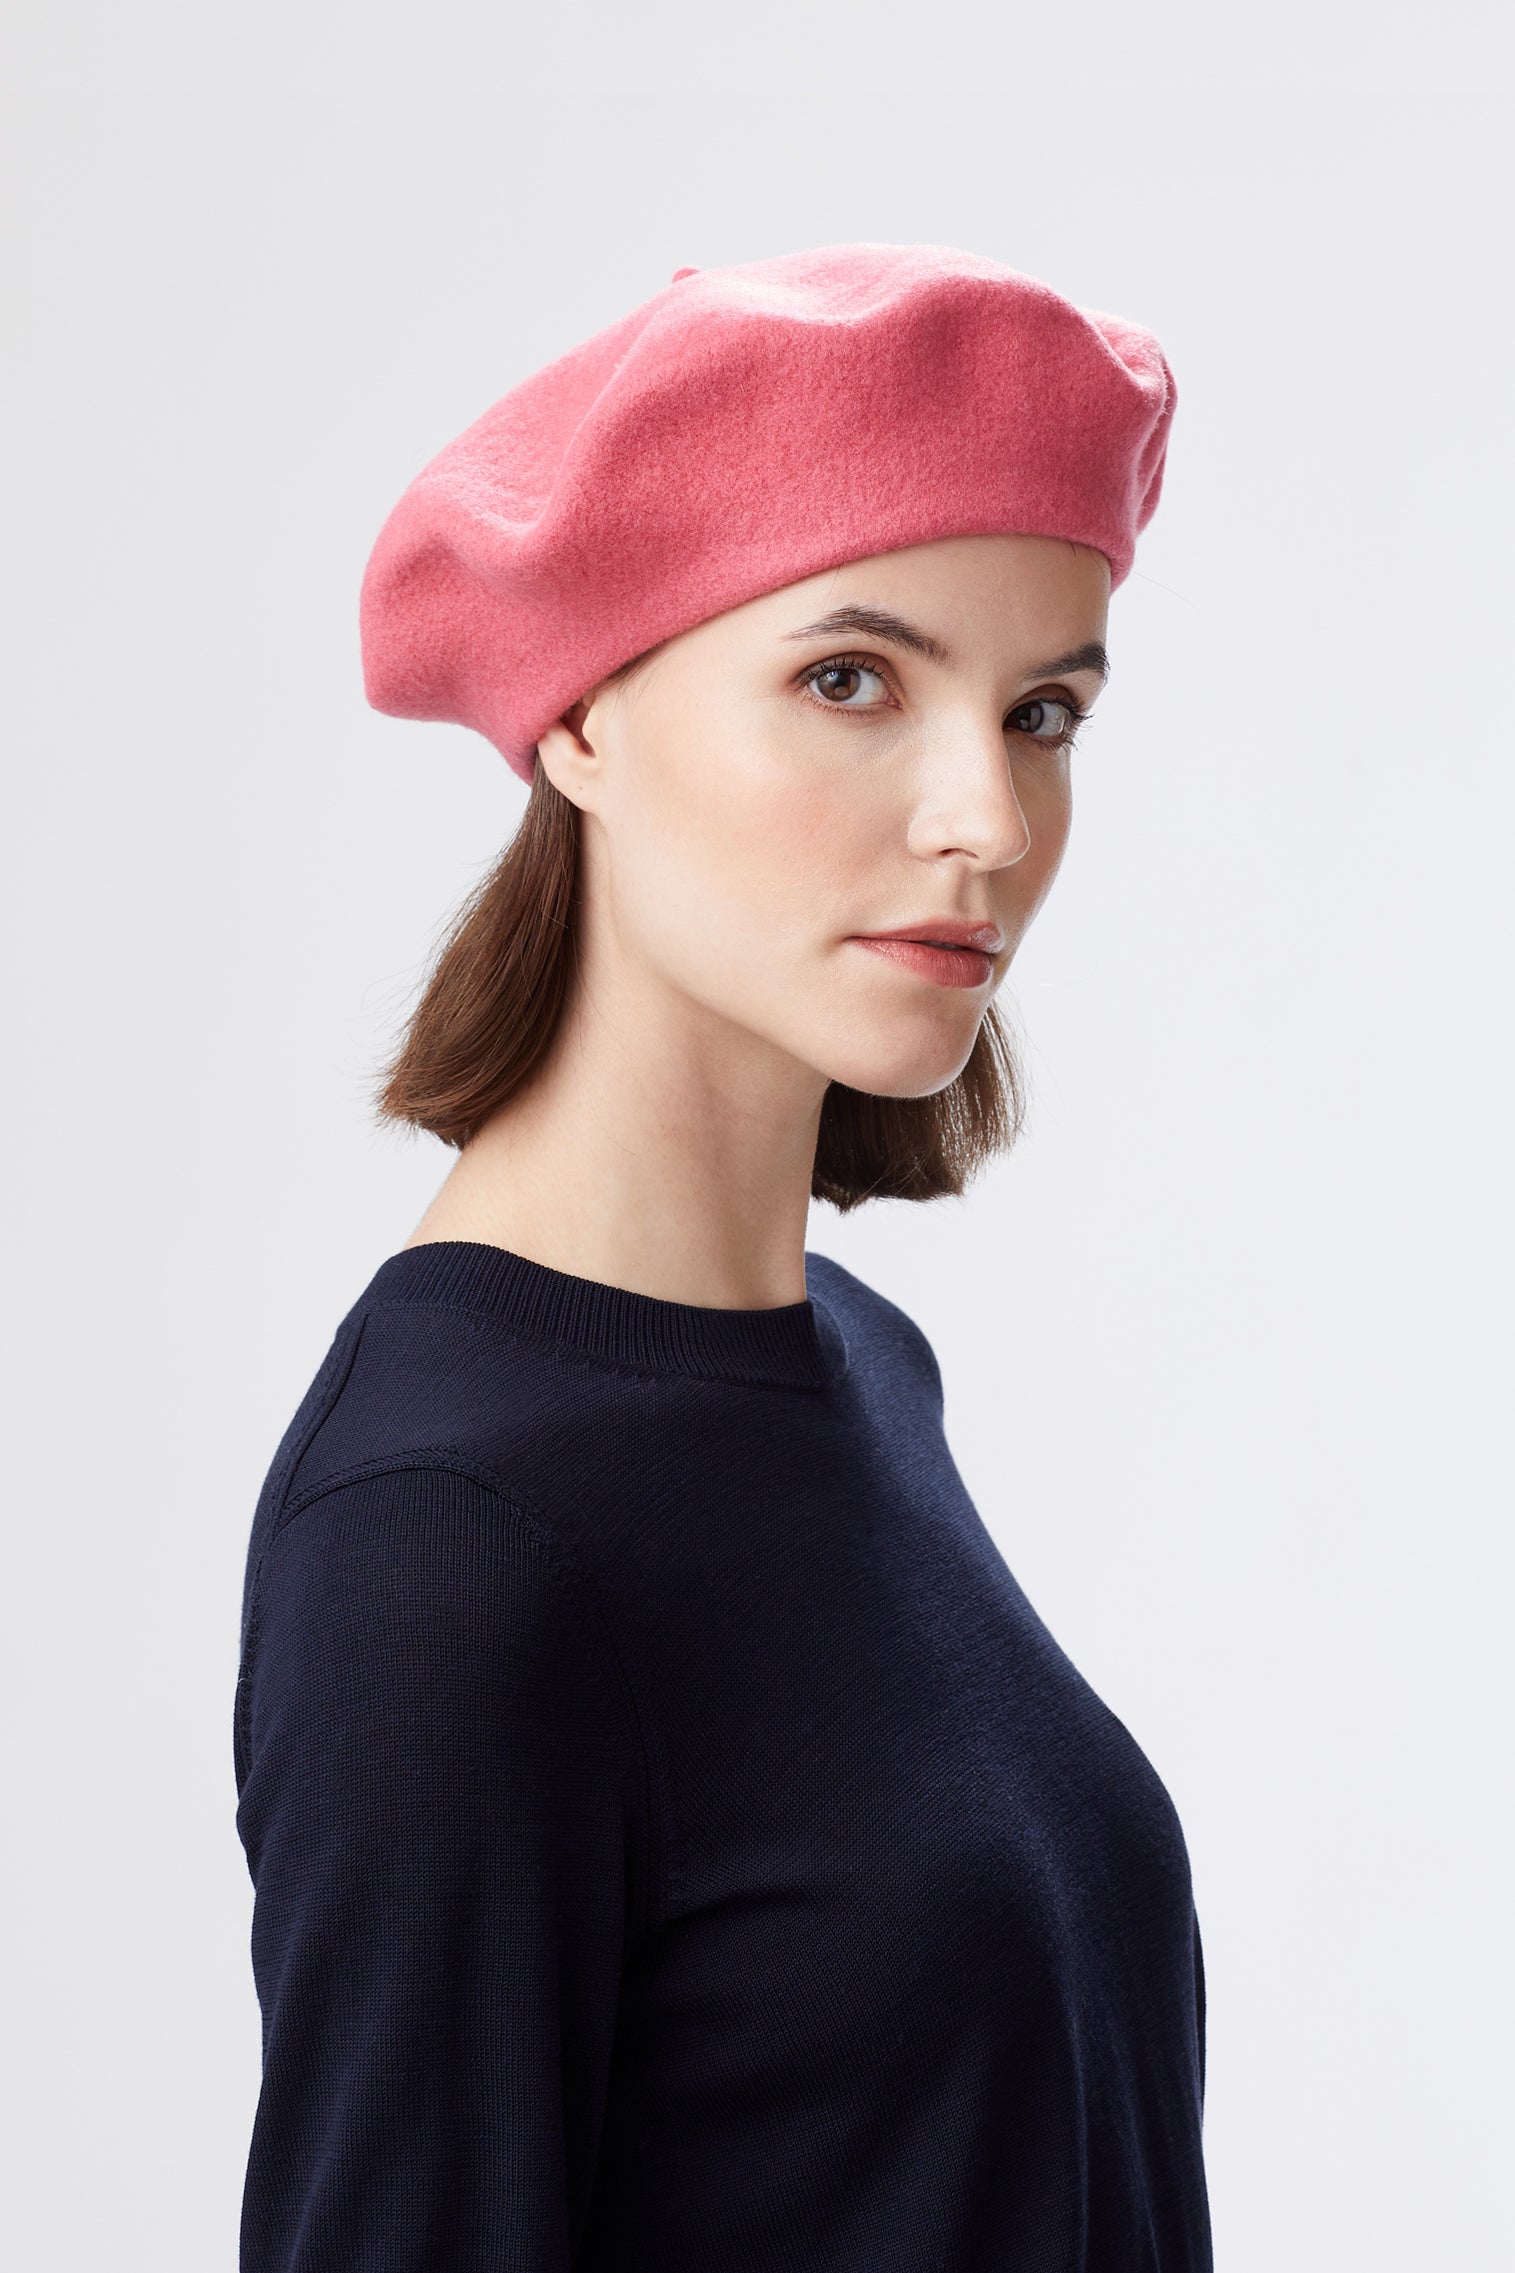 French Beret - Products - Lock & Co. Hatters London UK